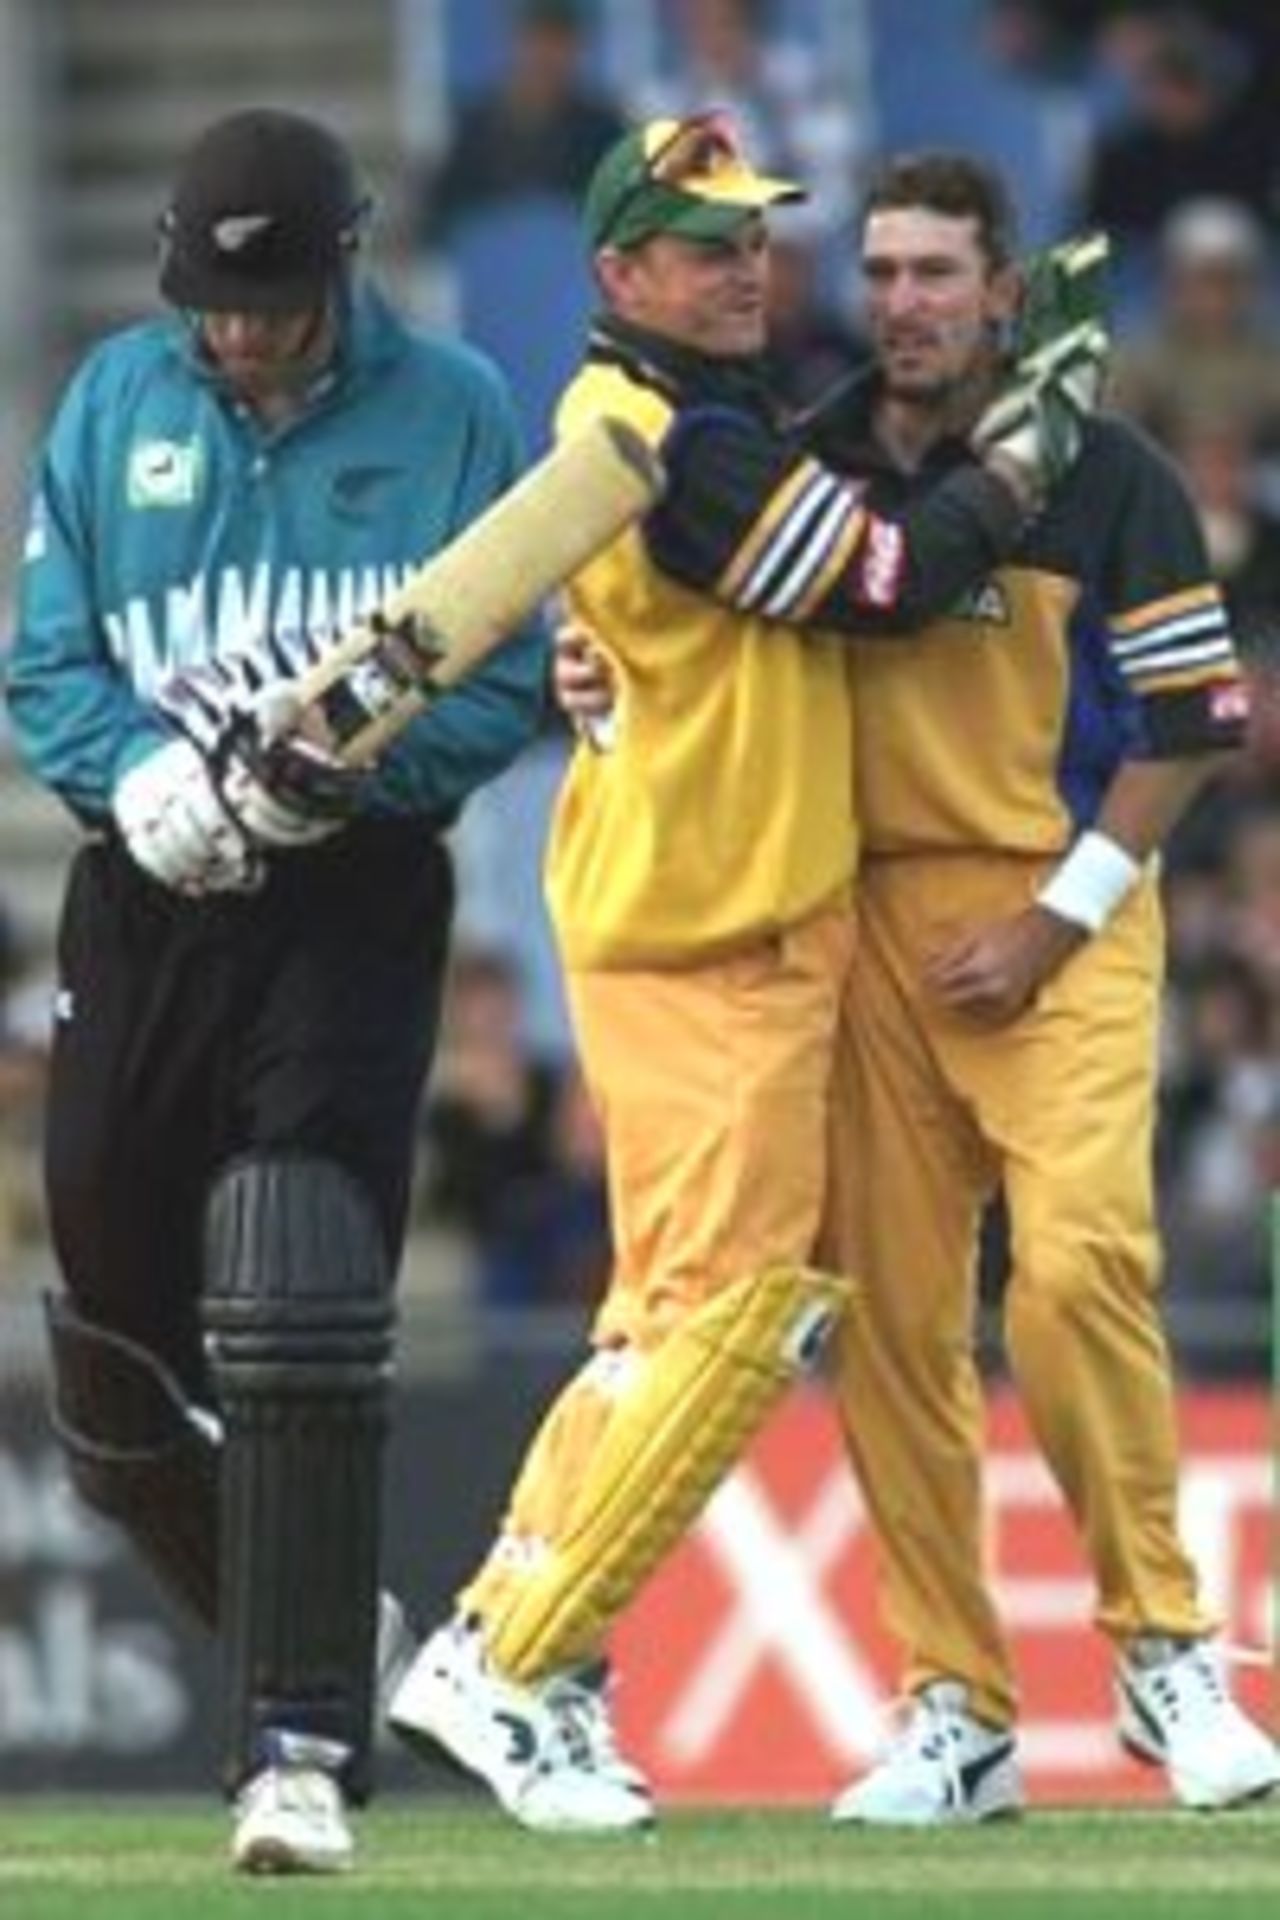 23 Feb 2000: Damien Fleming (right) gives Stephen Fleming of New Zealand a send off as Adam Gilchrist (centre) congratulates Damien Fleming of Australia during the third one day international between New Zealand and Australia at Carisbrook, Dunedin, New Zealand.